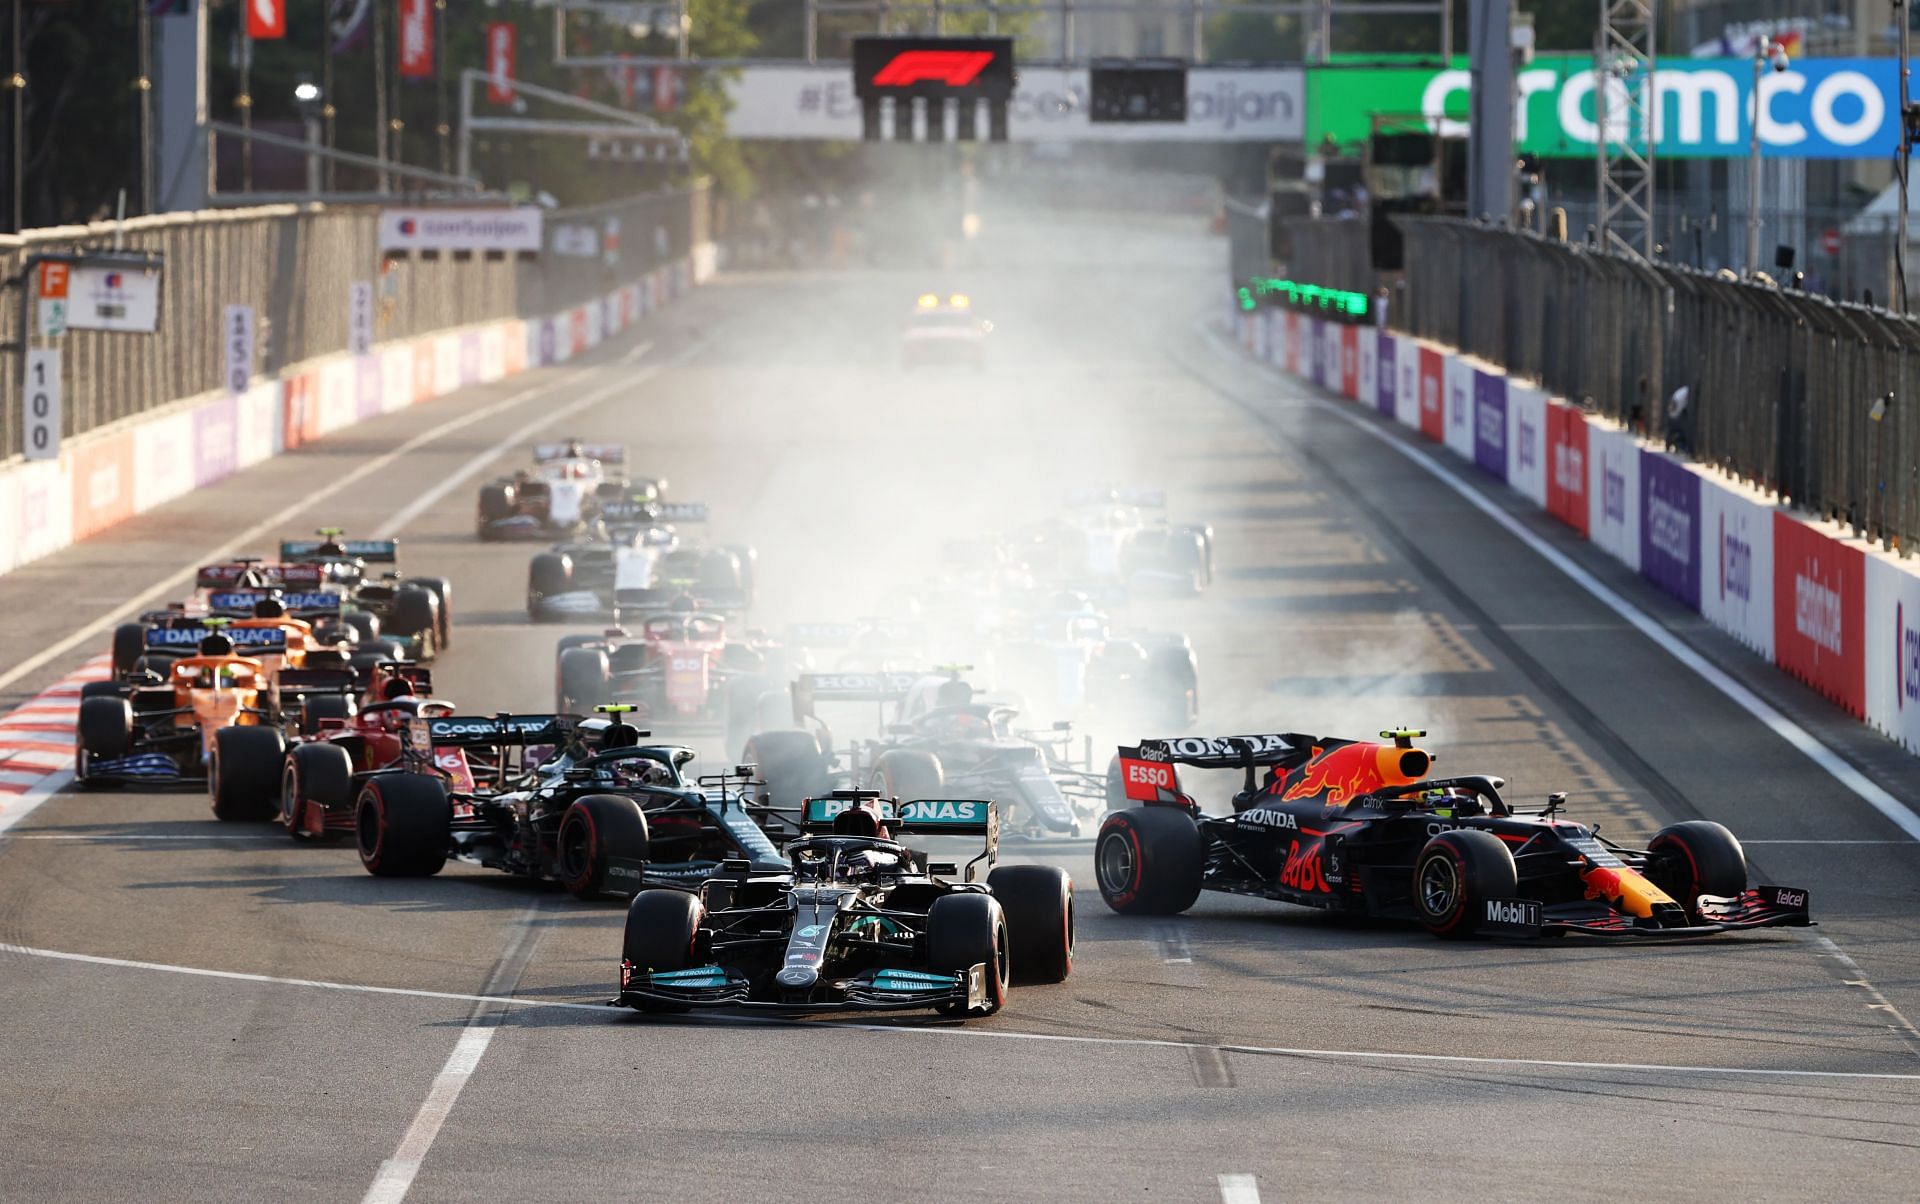 Hamilton locks up and goes wide at the race restart in Baku